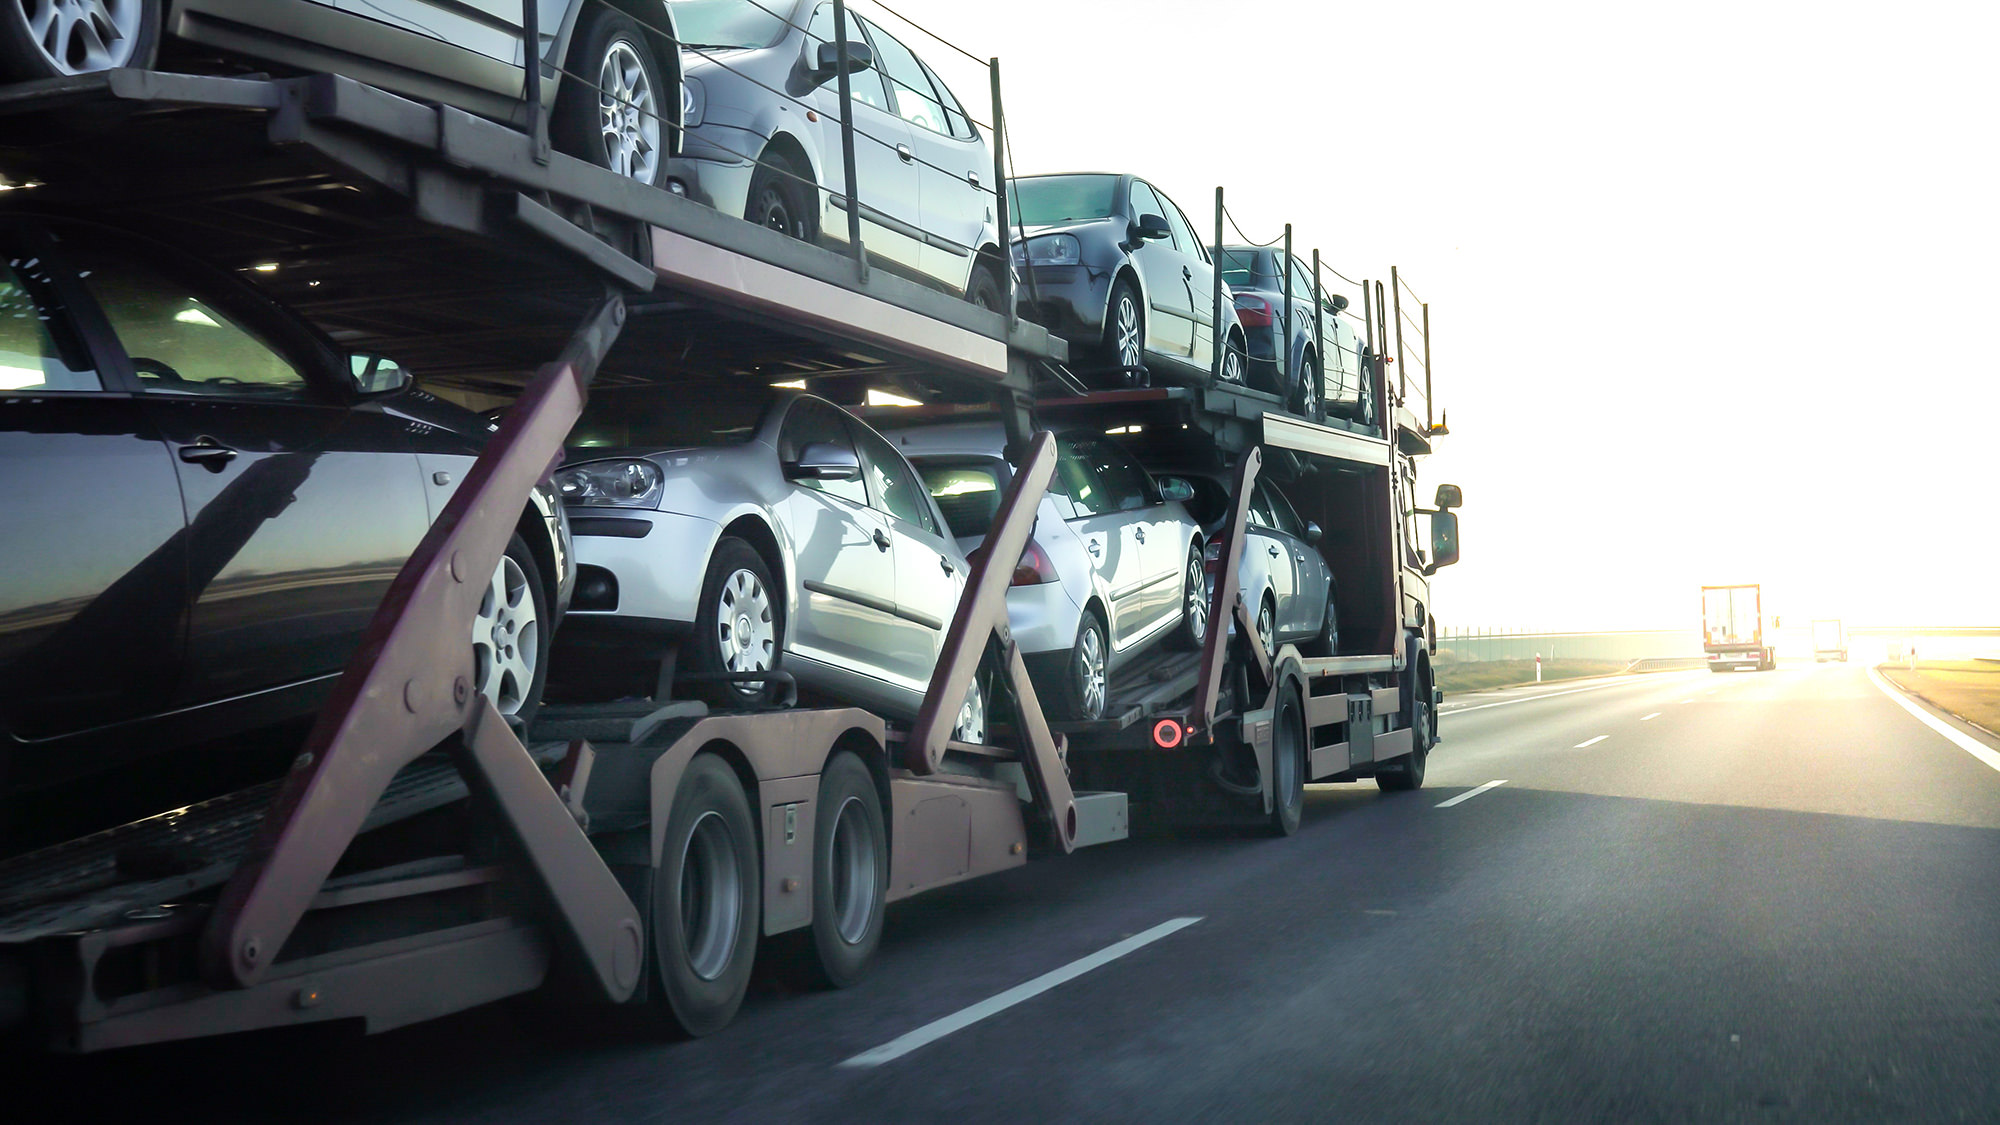 8 passenger cars being transported on a truck.